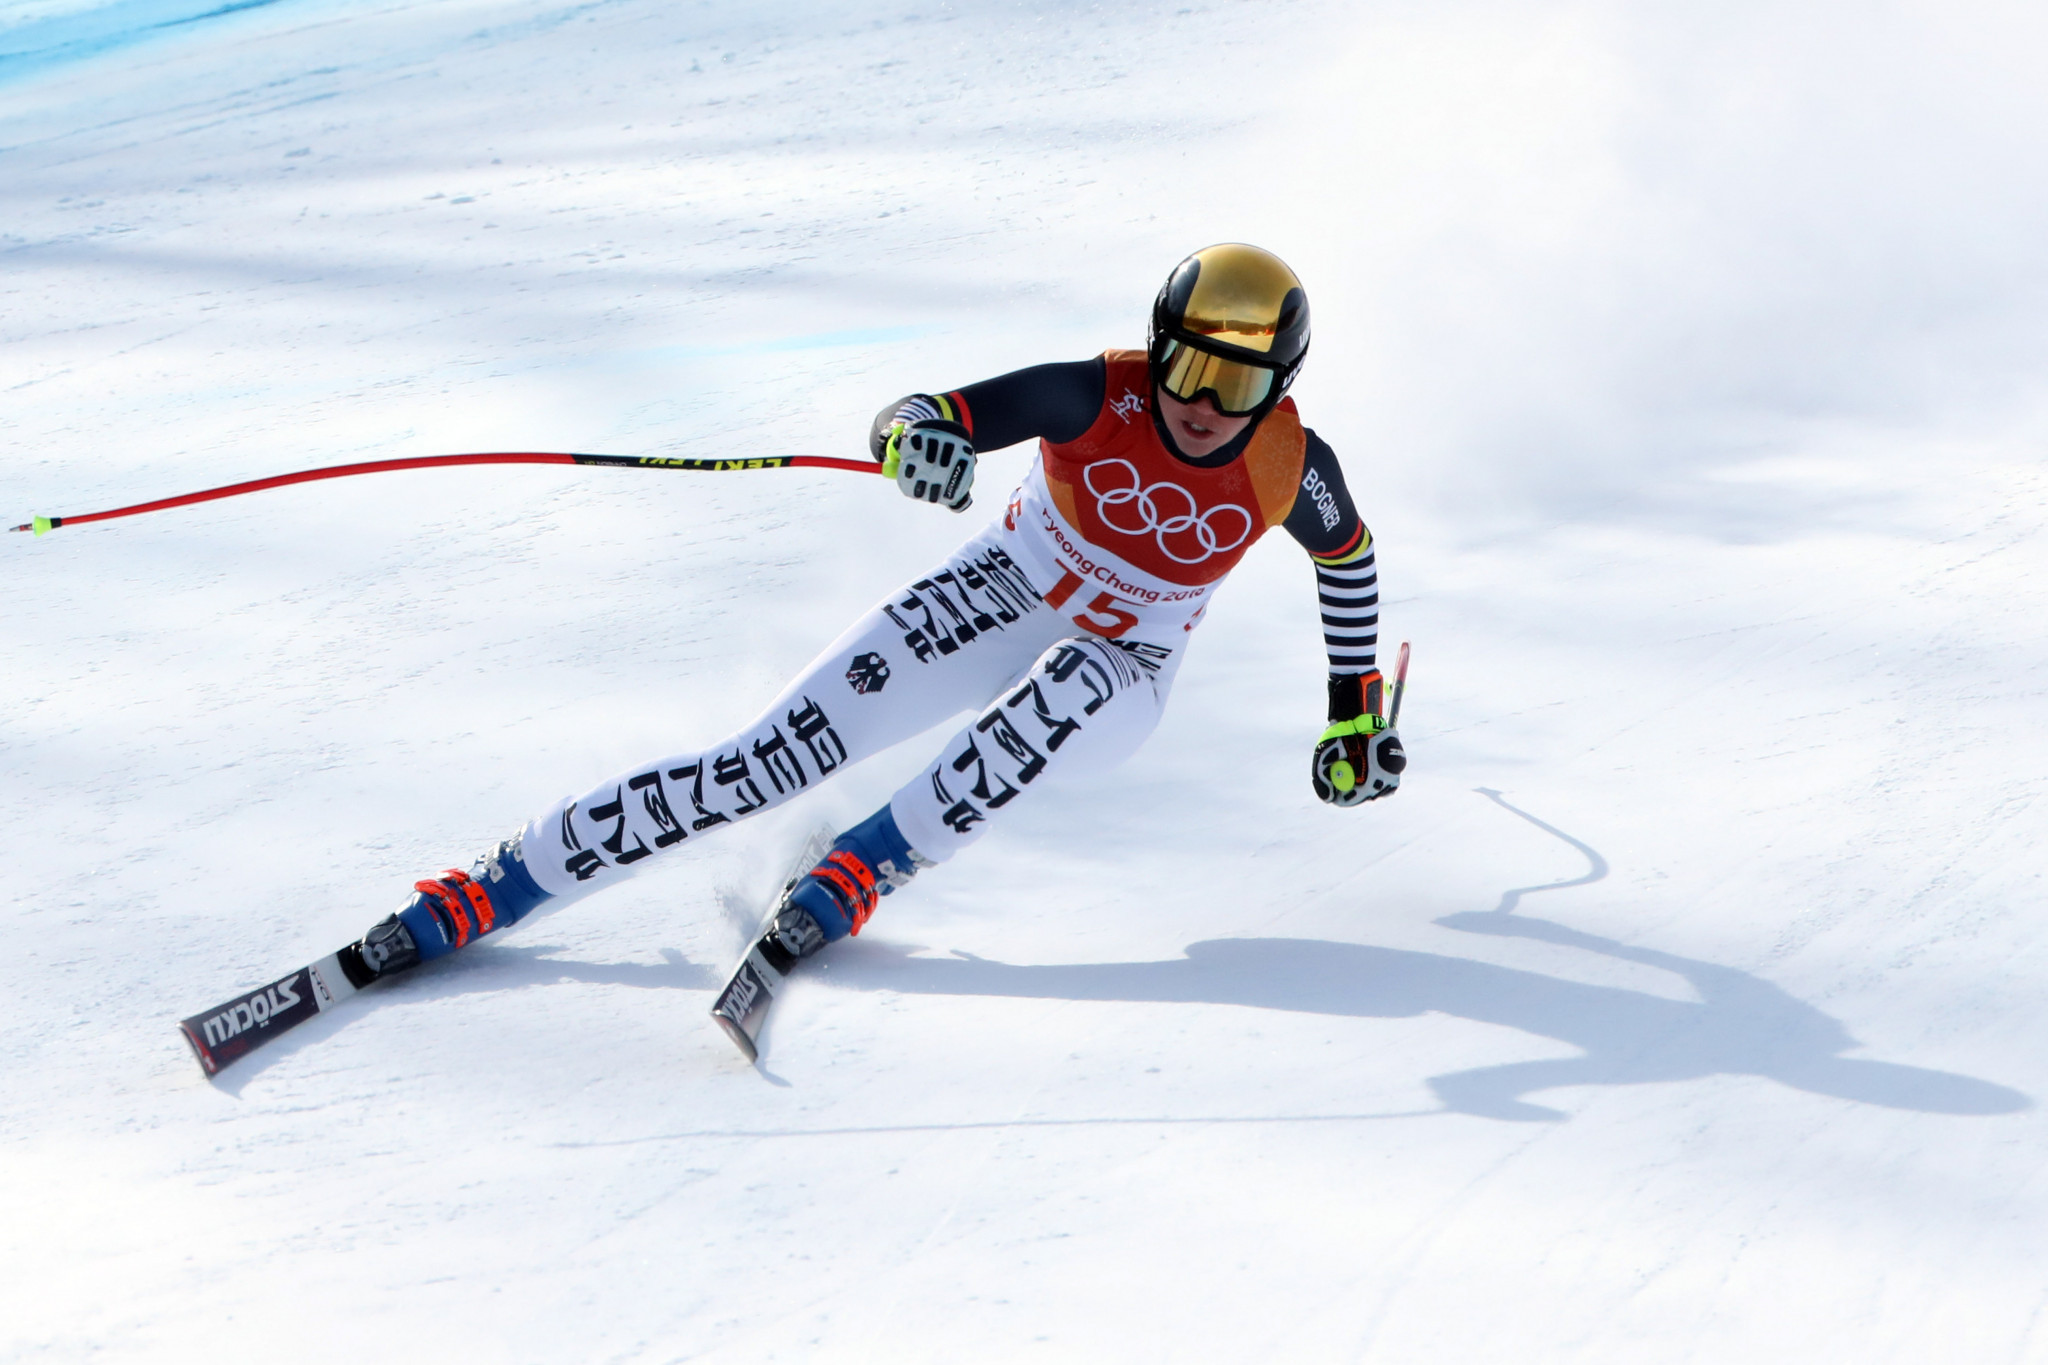 Rebensburg hoping for home success at penultimate FIS Alpine World Cup leg